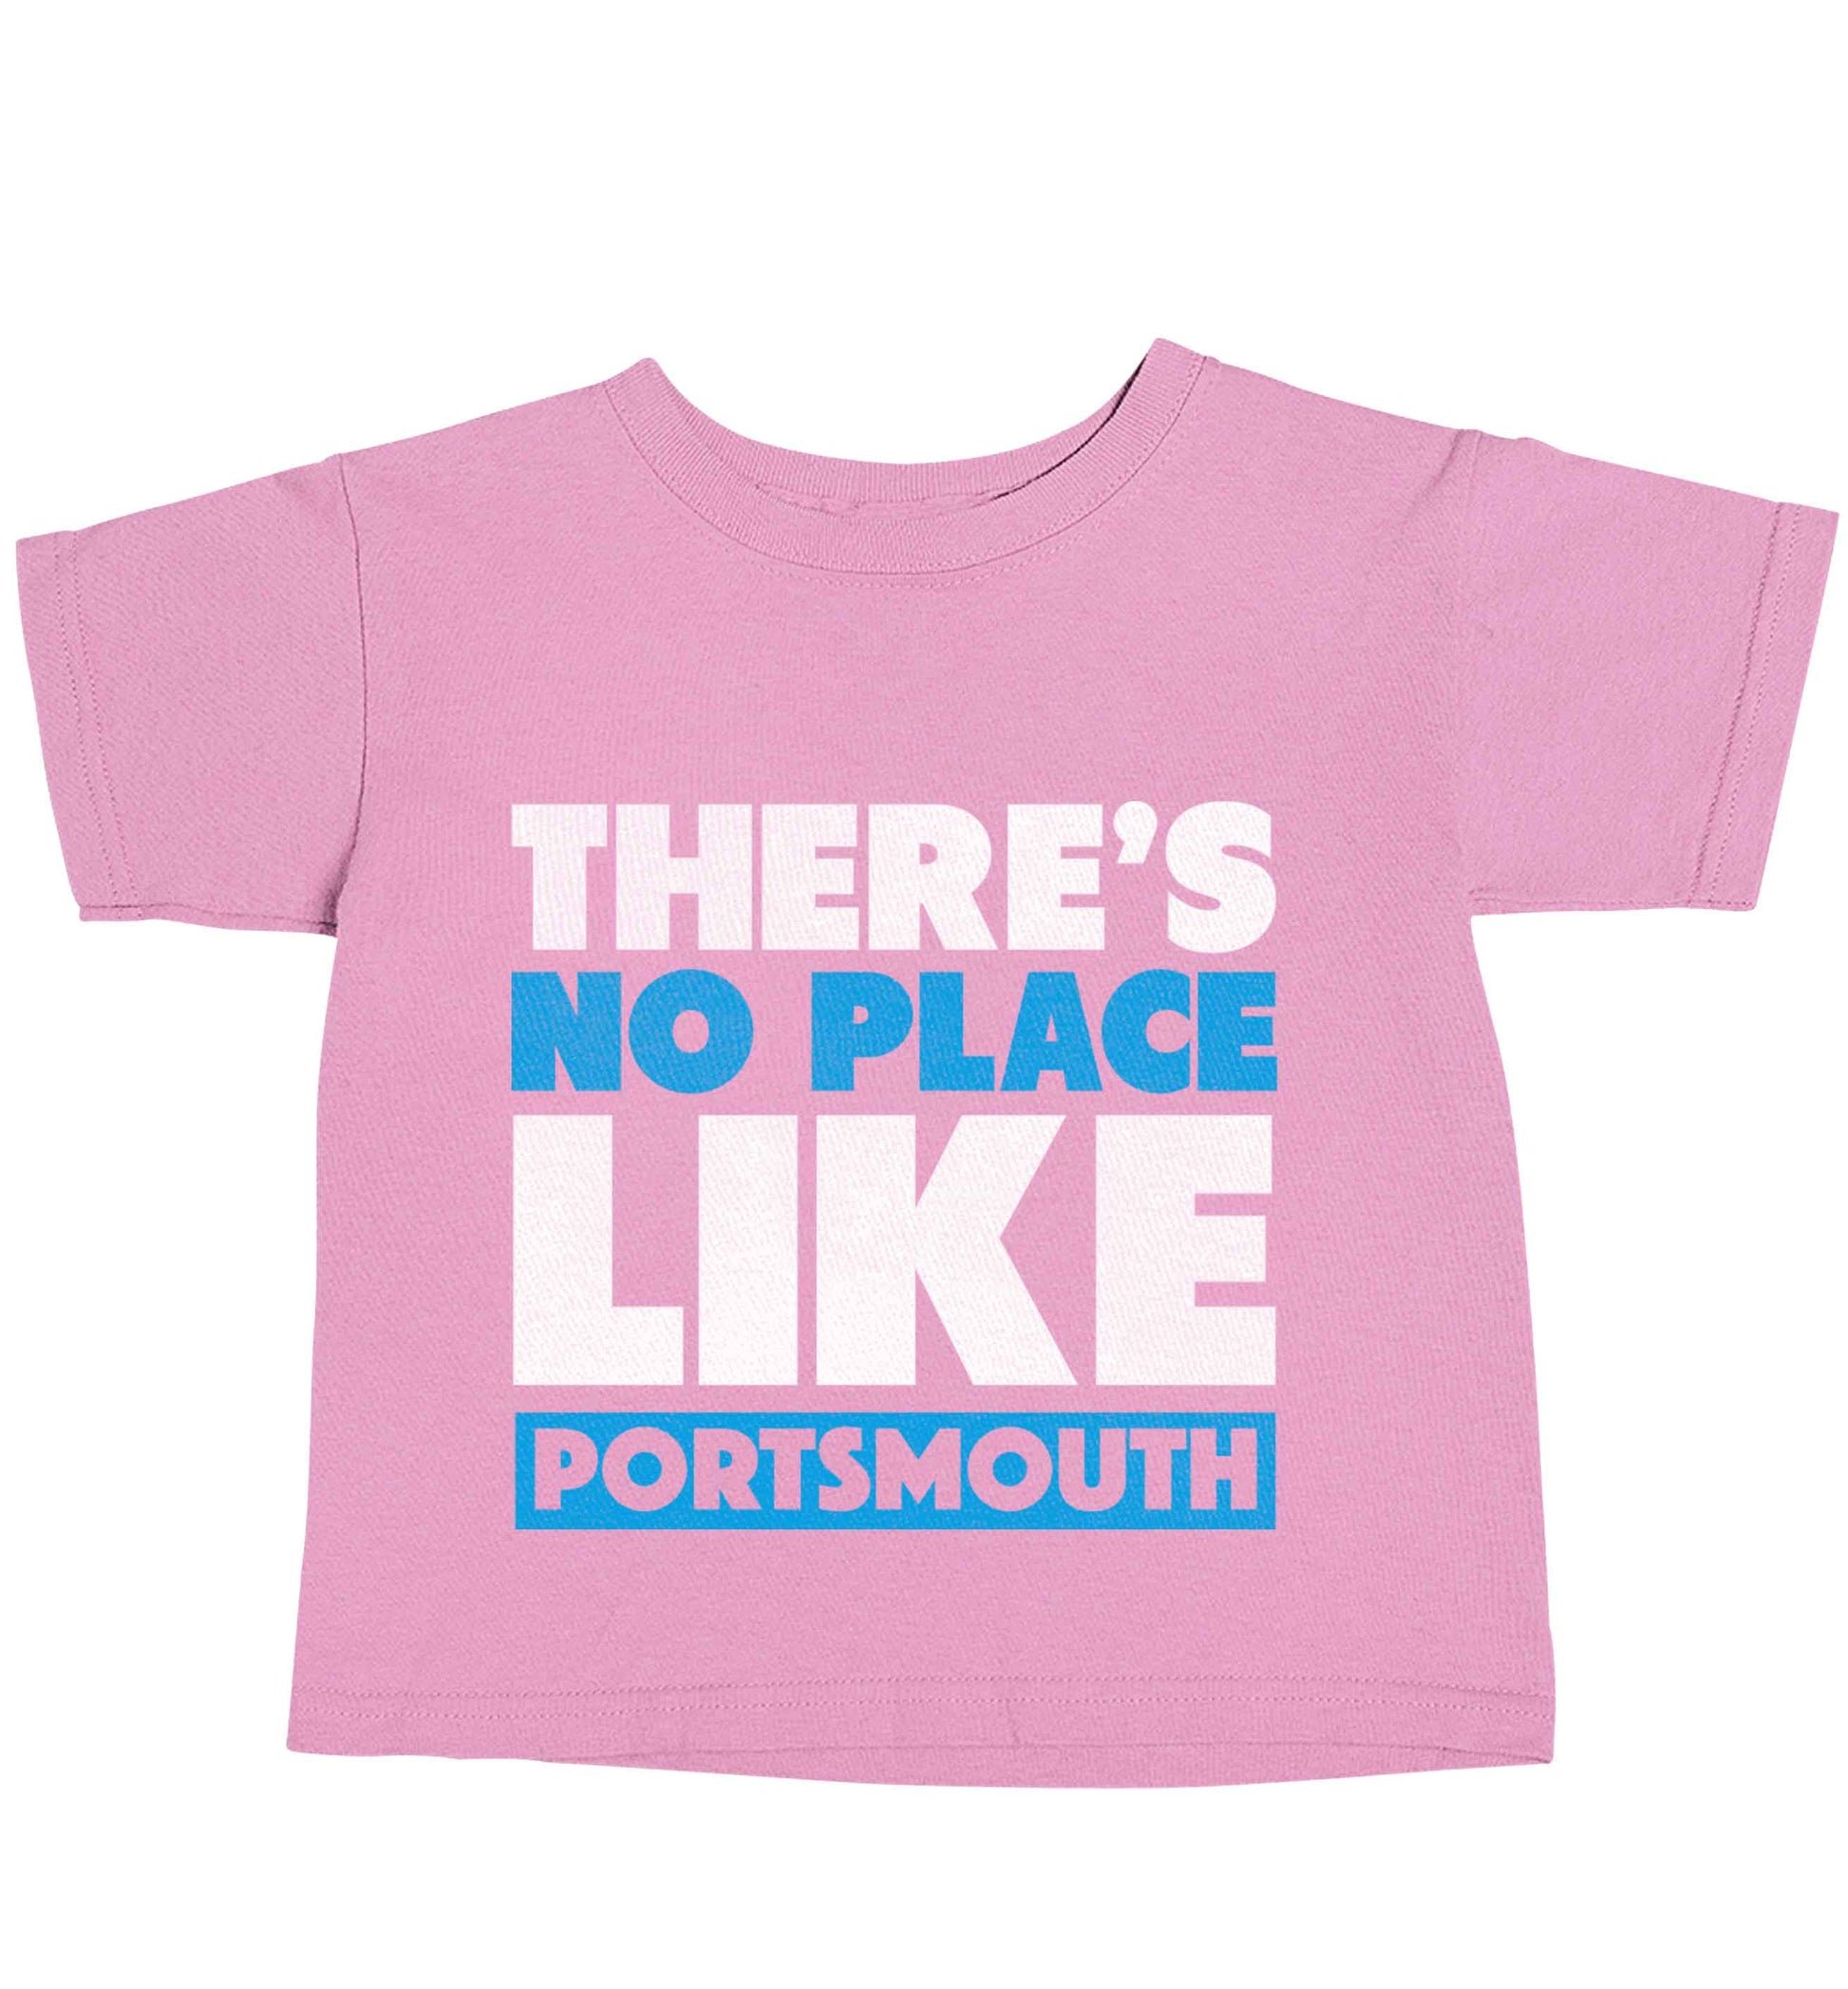 There's no place like Porstmouth light pink baby toddler Tshirt 2 Years